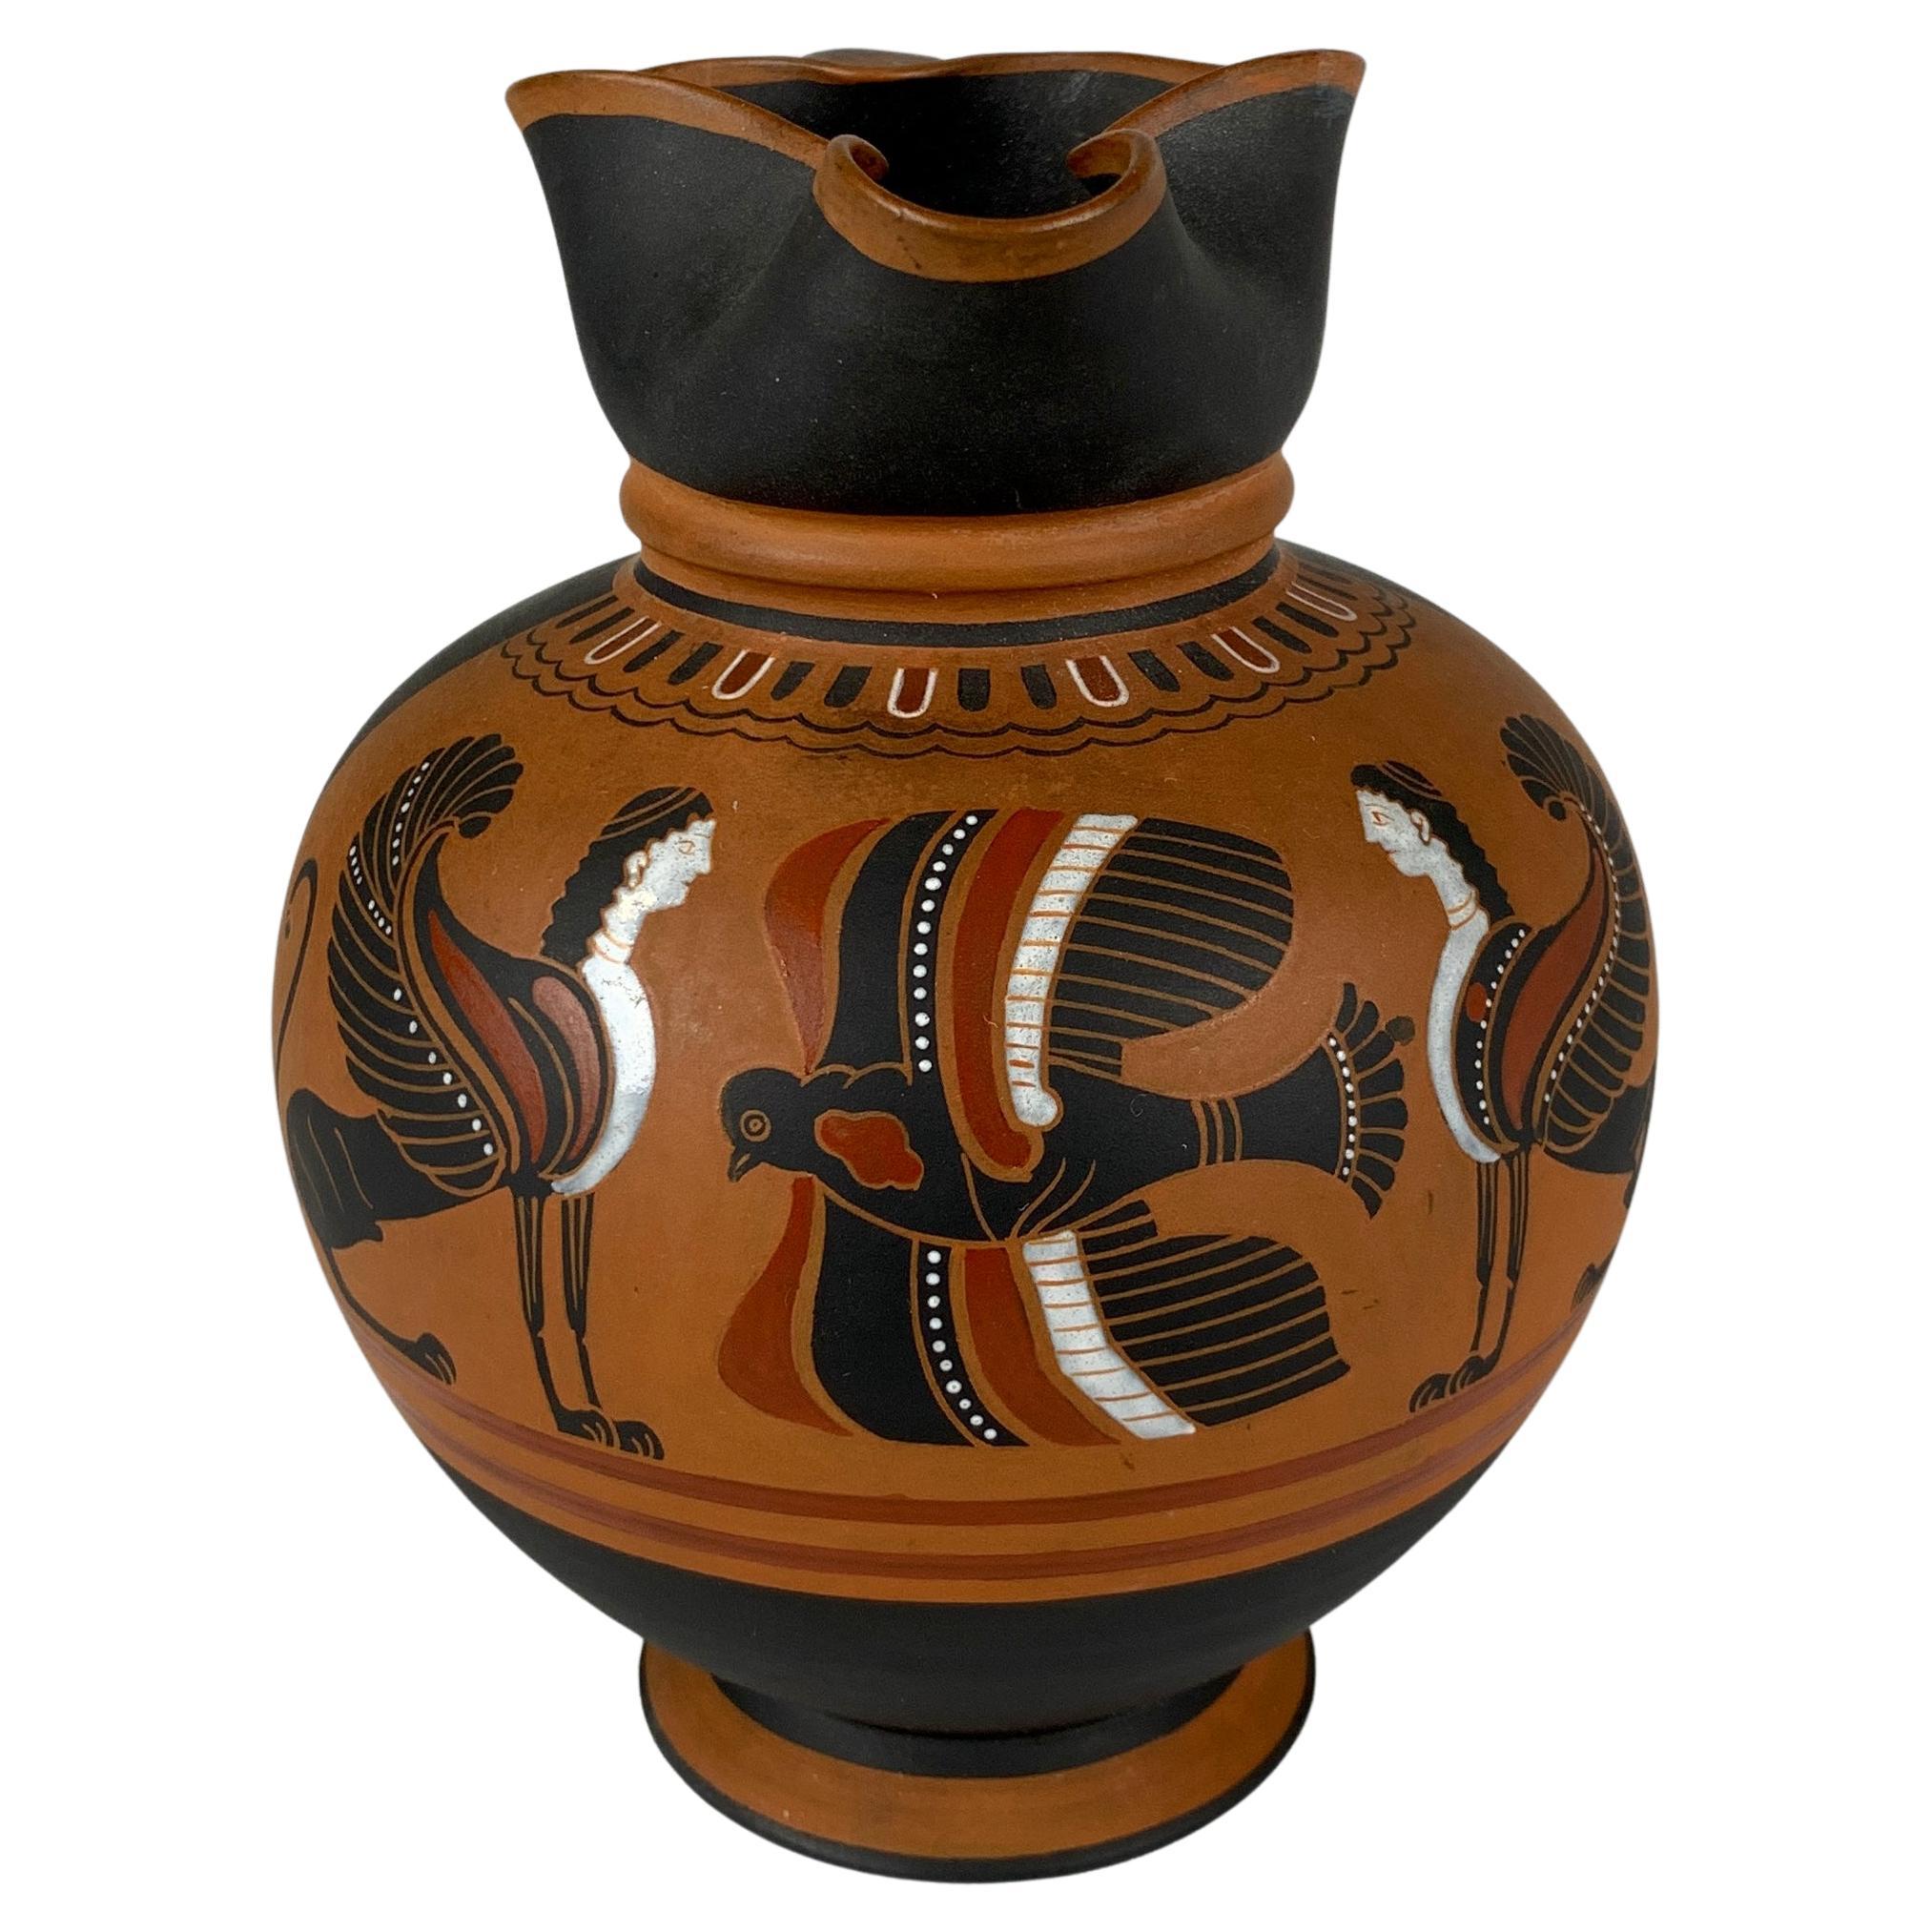 Wedgwood Egyptian Jug Decorated in Black Basalt and Rosso Antico